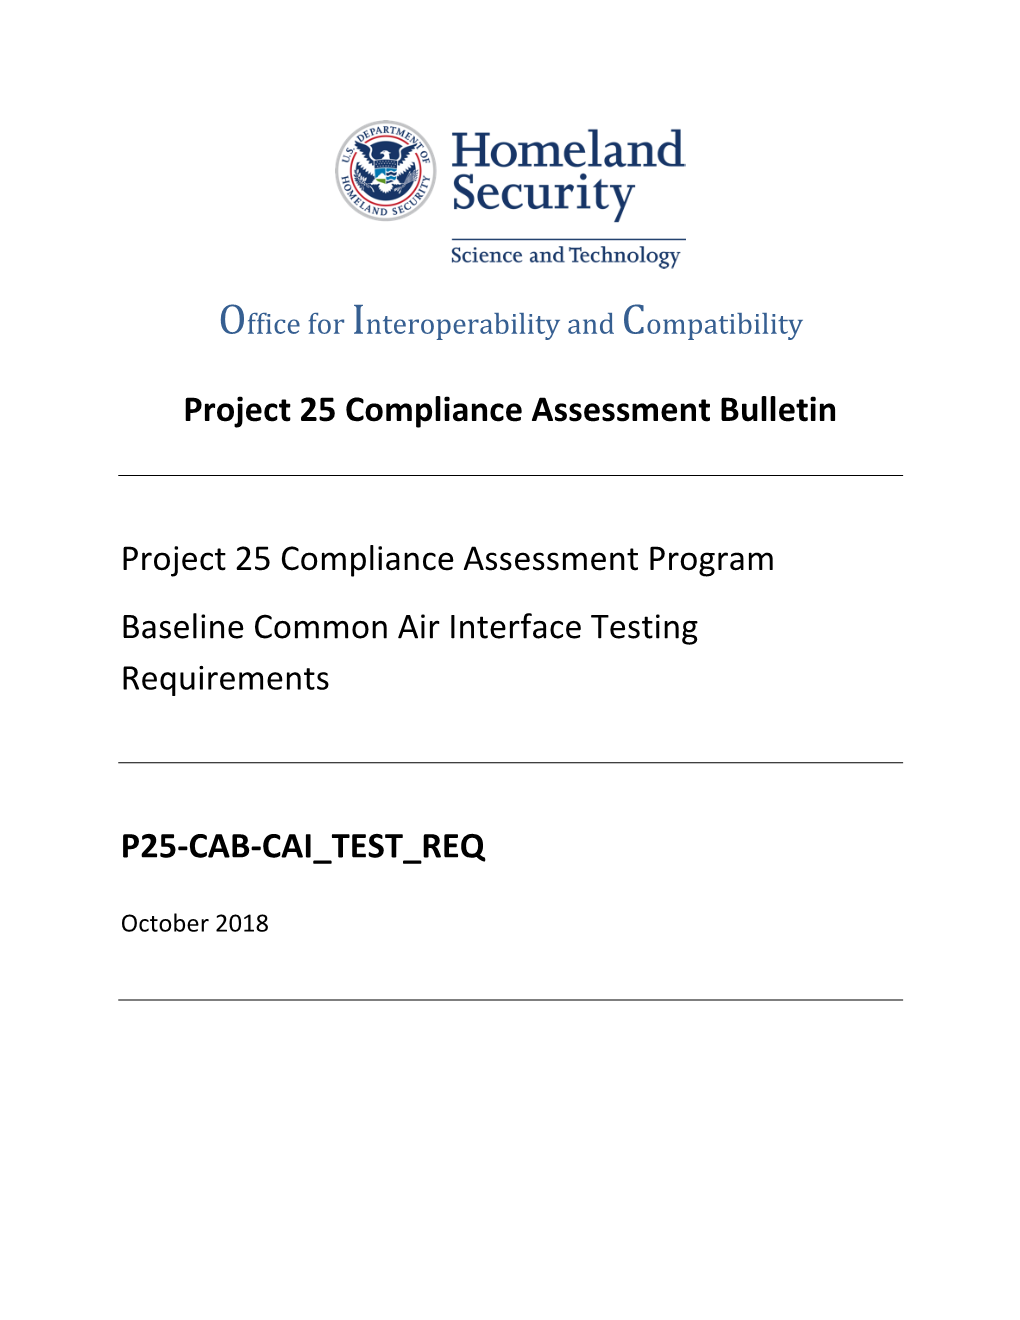 Project 25 Compliance Assessment Program Baseline Common Air Interface Testing Requirements